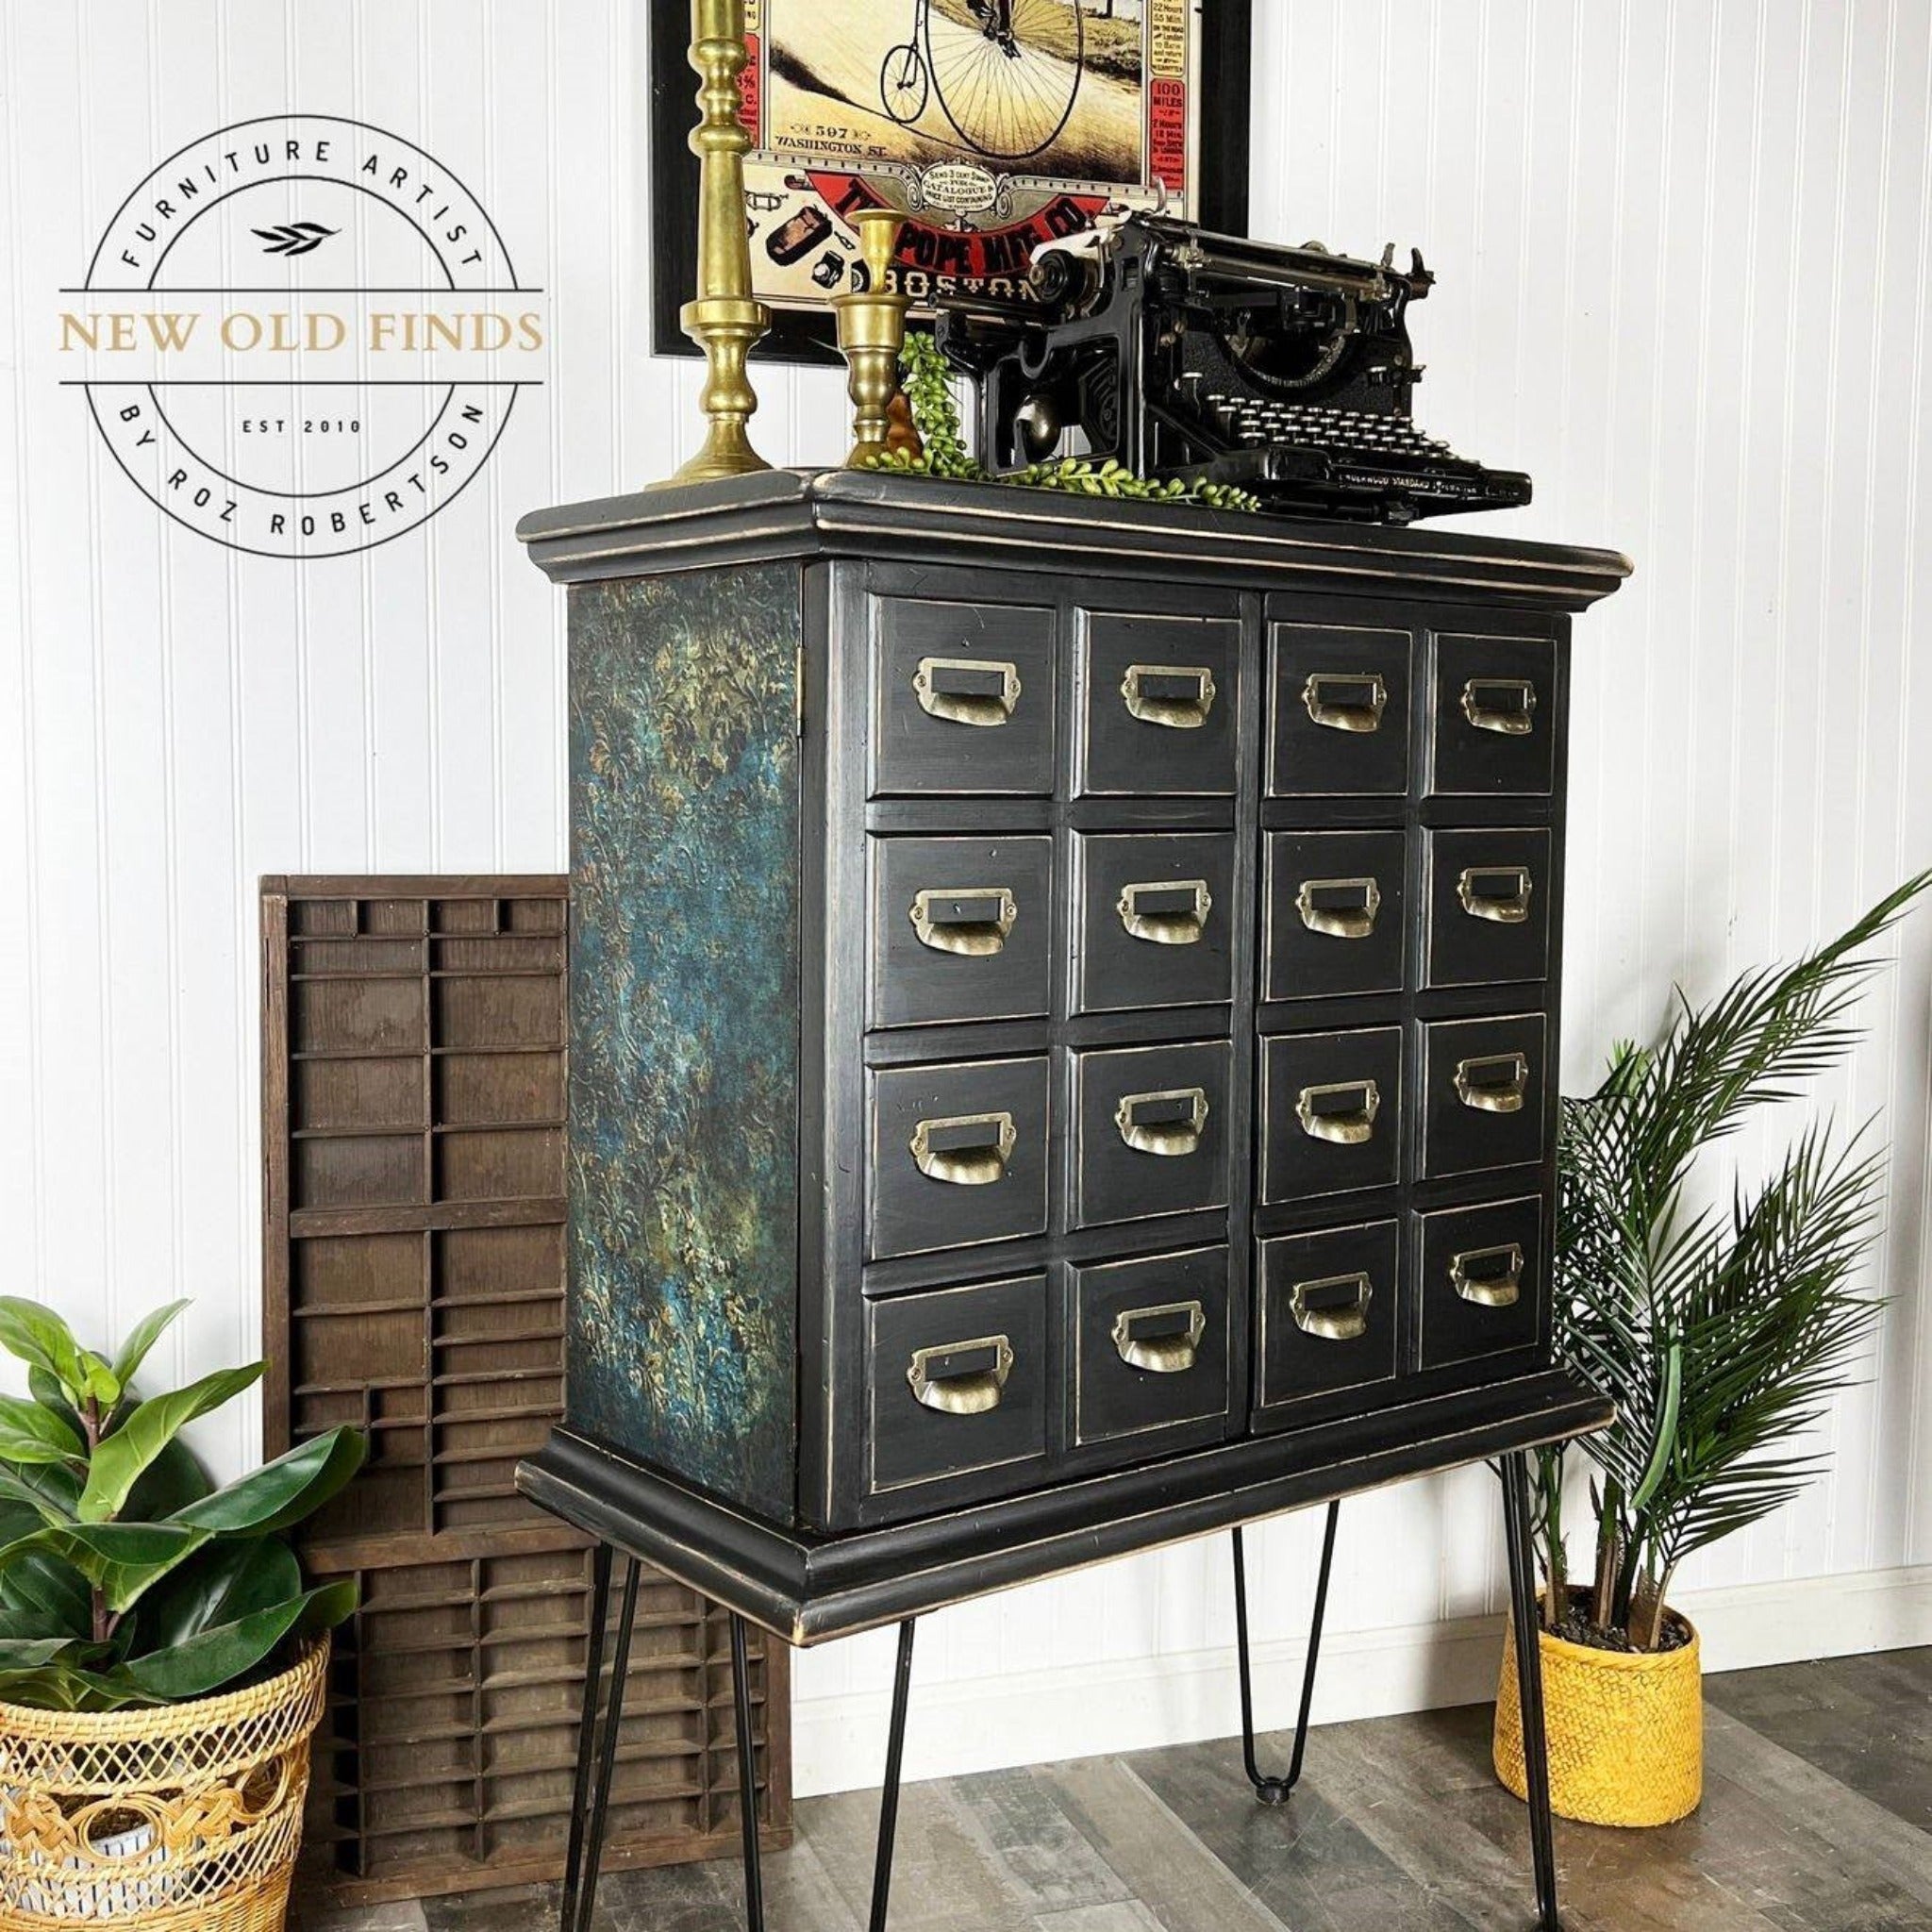 A vintage apothecary cabinet refurbished by New Old Finds is painted black and features ReDesign with Prima's Aged Patina A1 fiber paper on the sides.